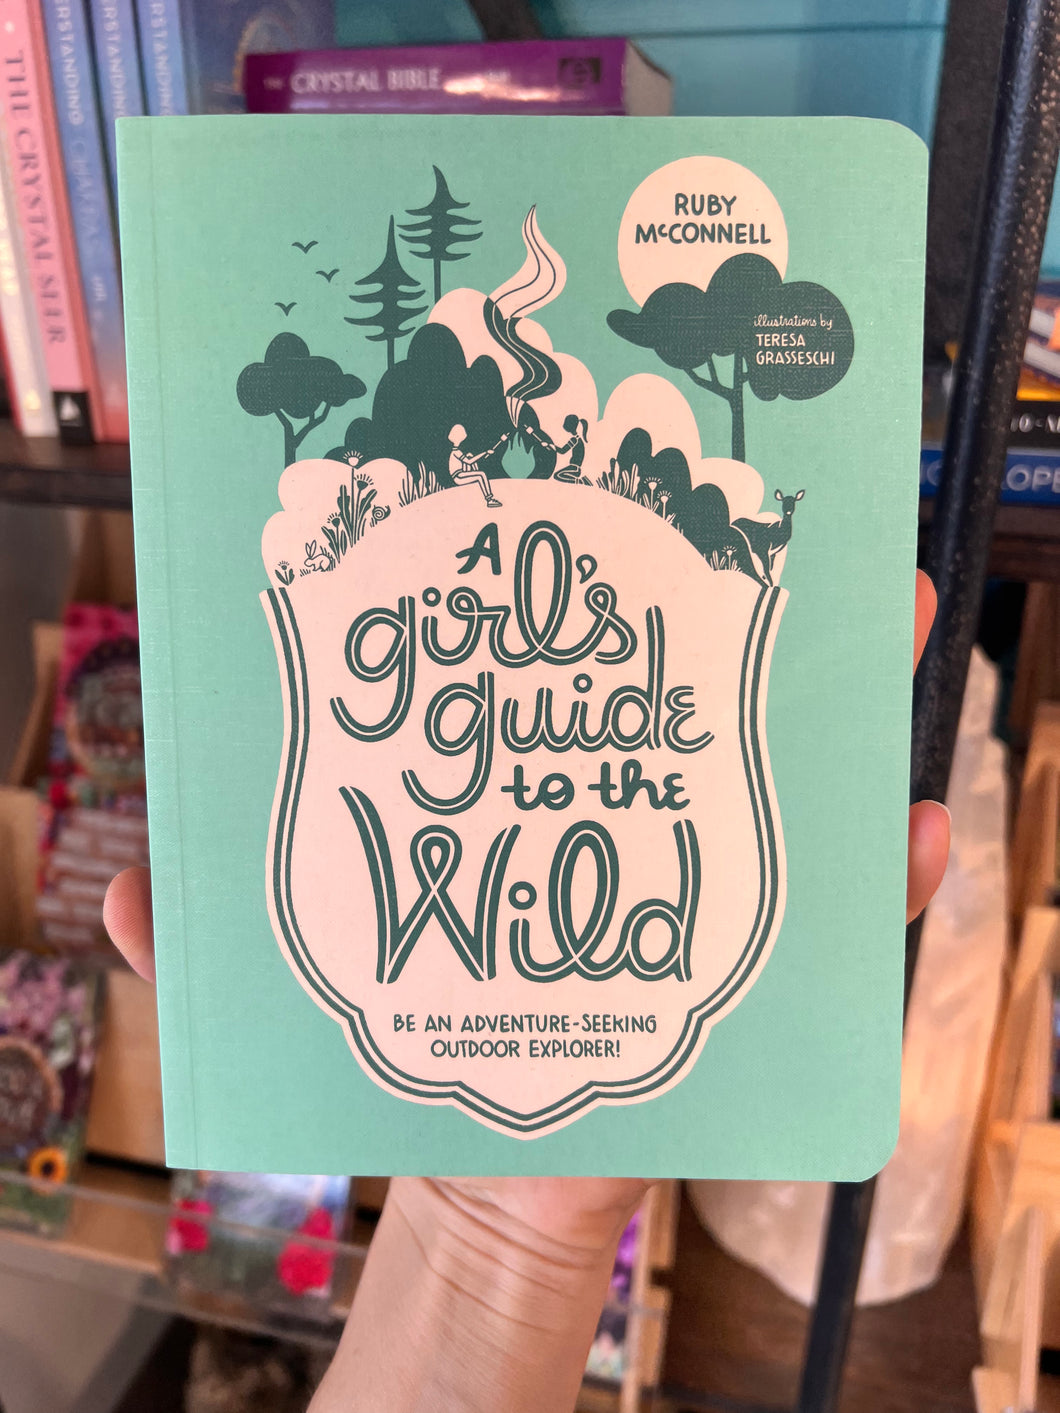 A GIRLA GUIDE TO THE WILD